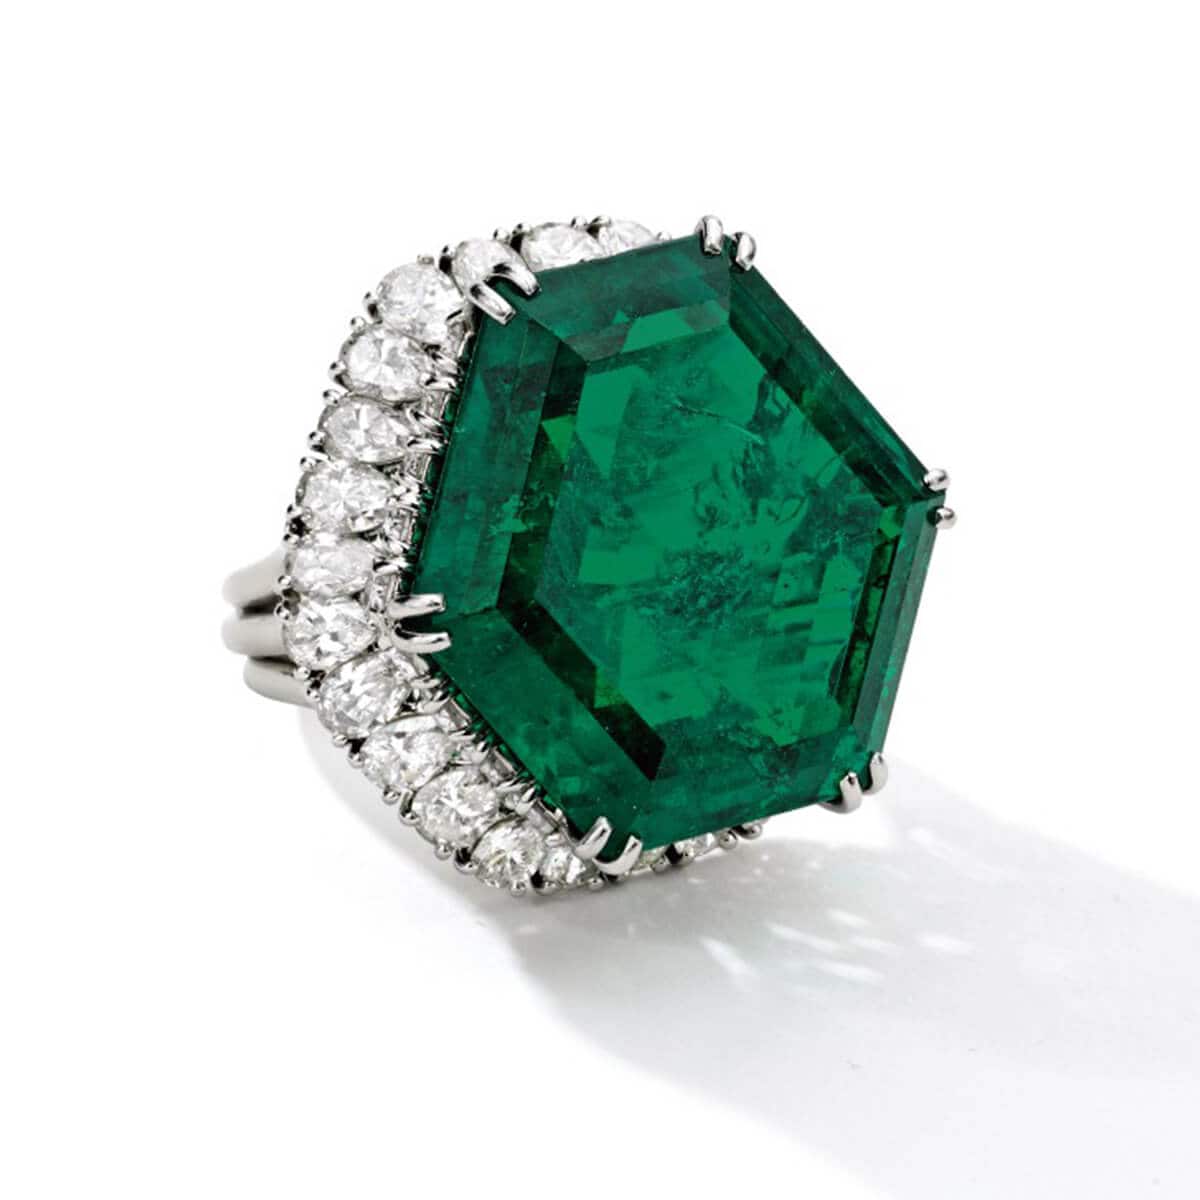 Image of The Stotesbury ring featuring a hexagonal-shaped Colombian emerald center stone weighing a total of 34.40 carats